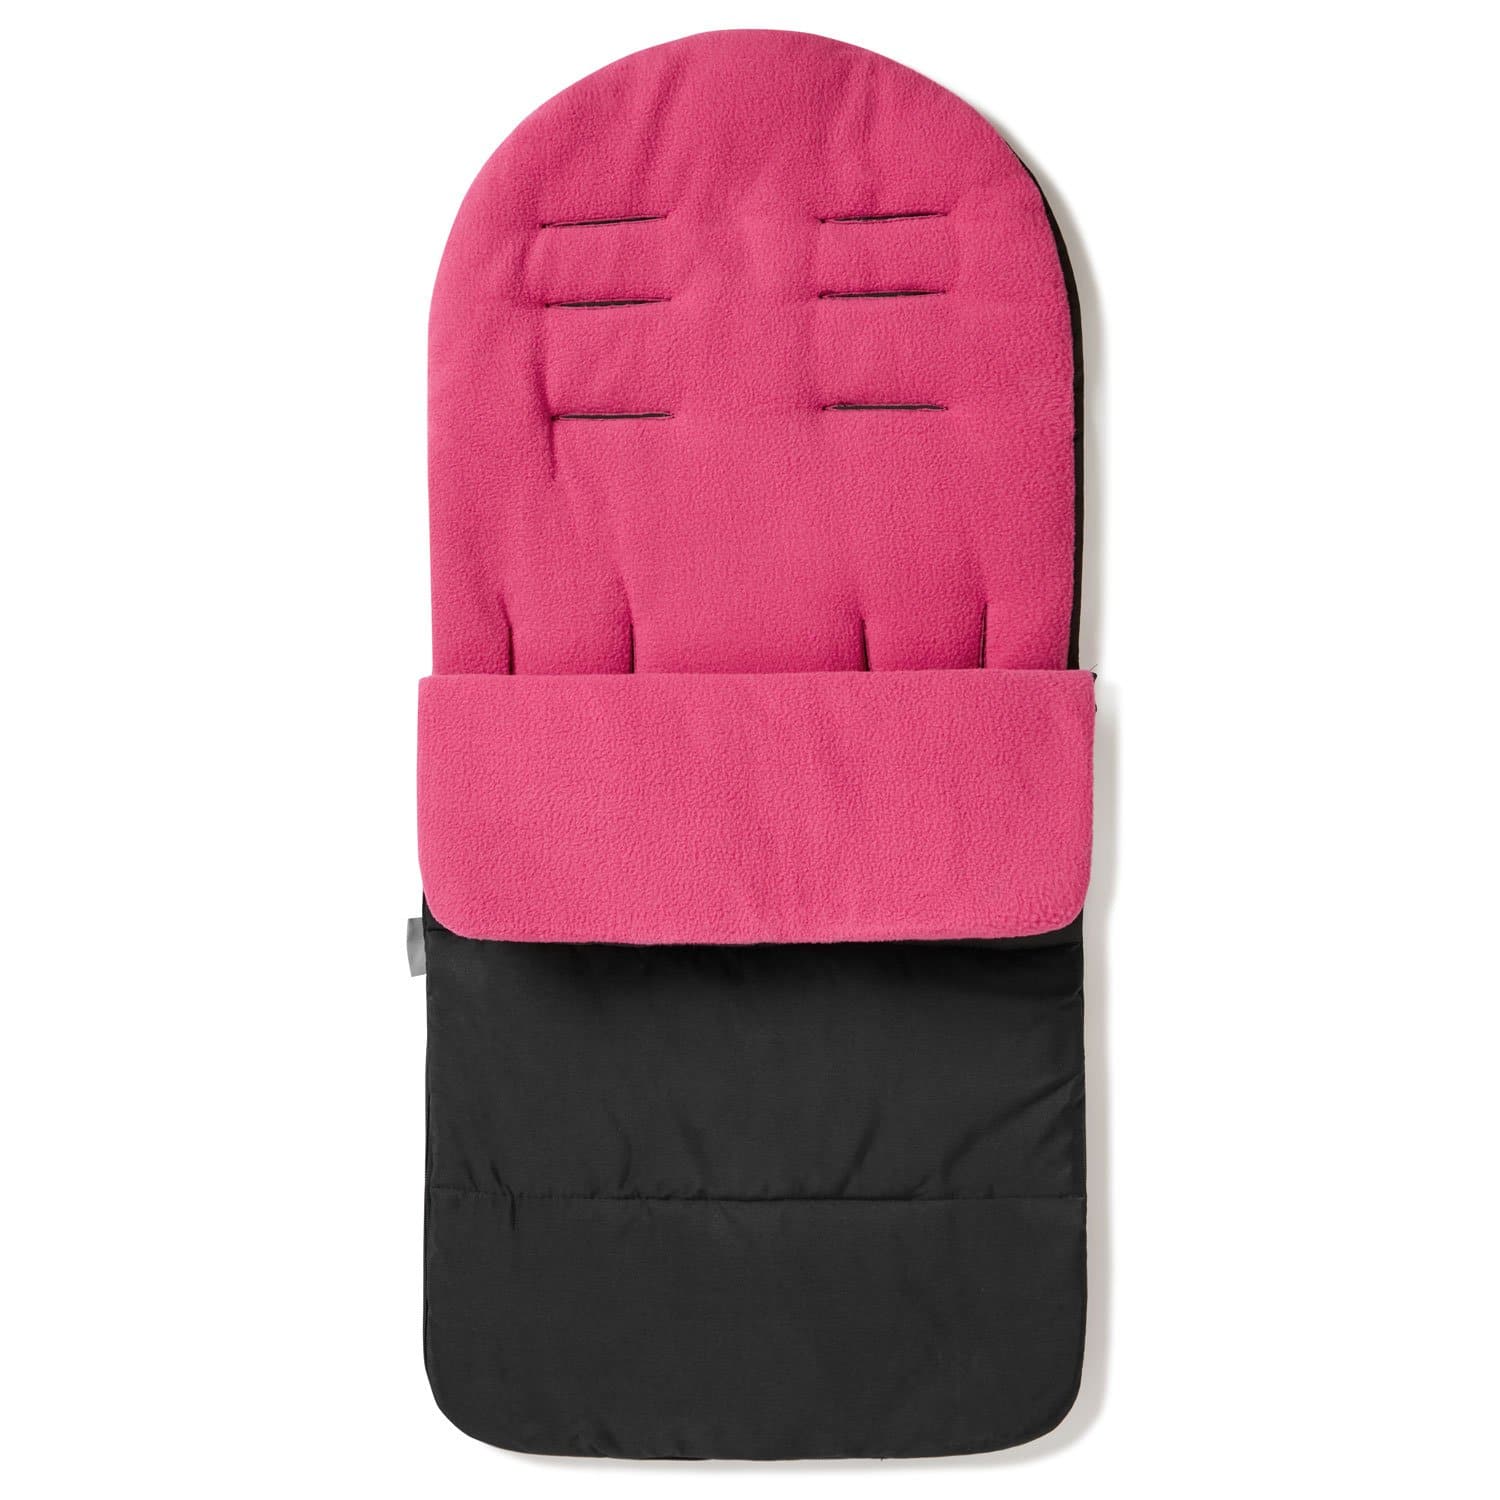 Premium Footmuff / Cosy Toes Compatible with Greentom - Pink Rose / Fits All Models | For Your Little One